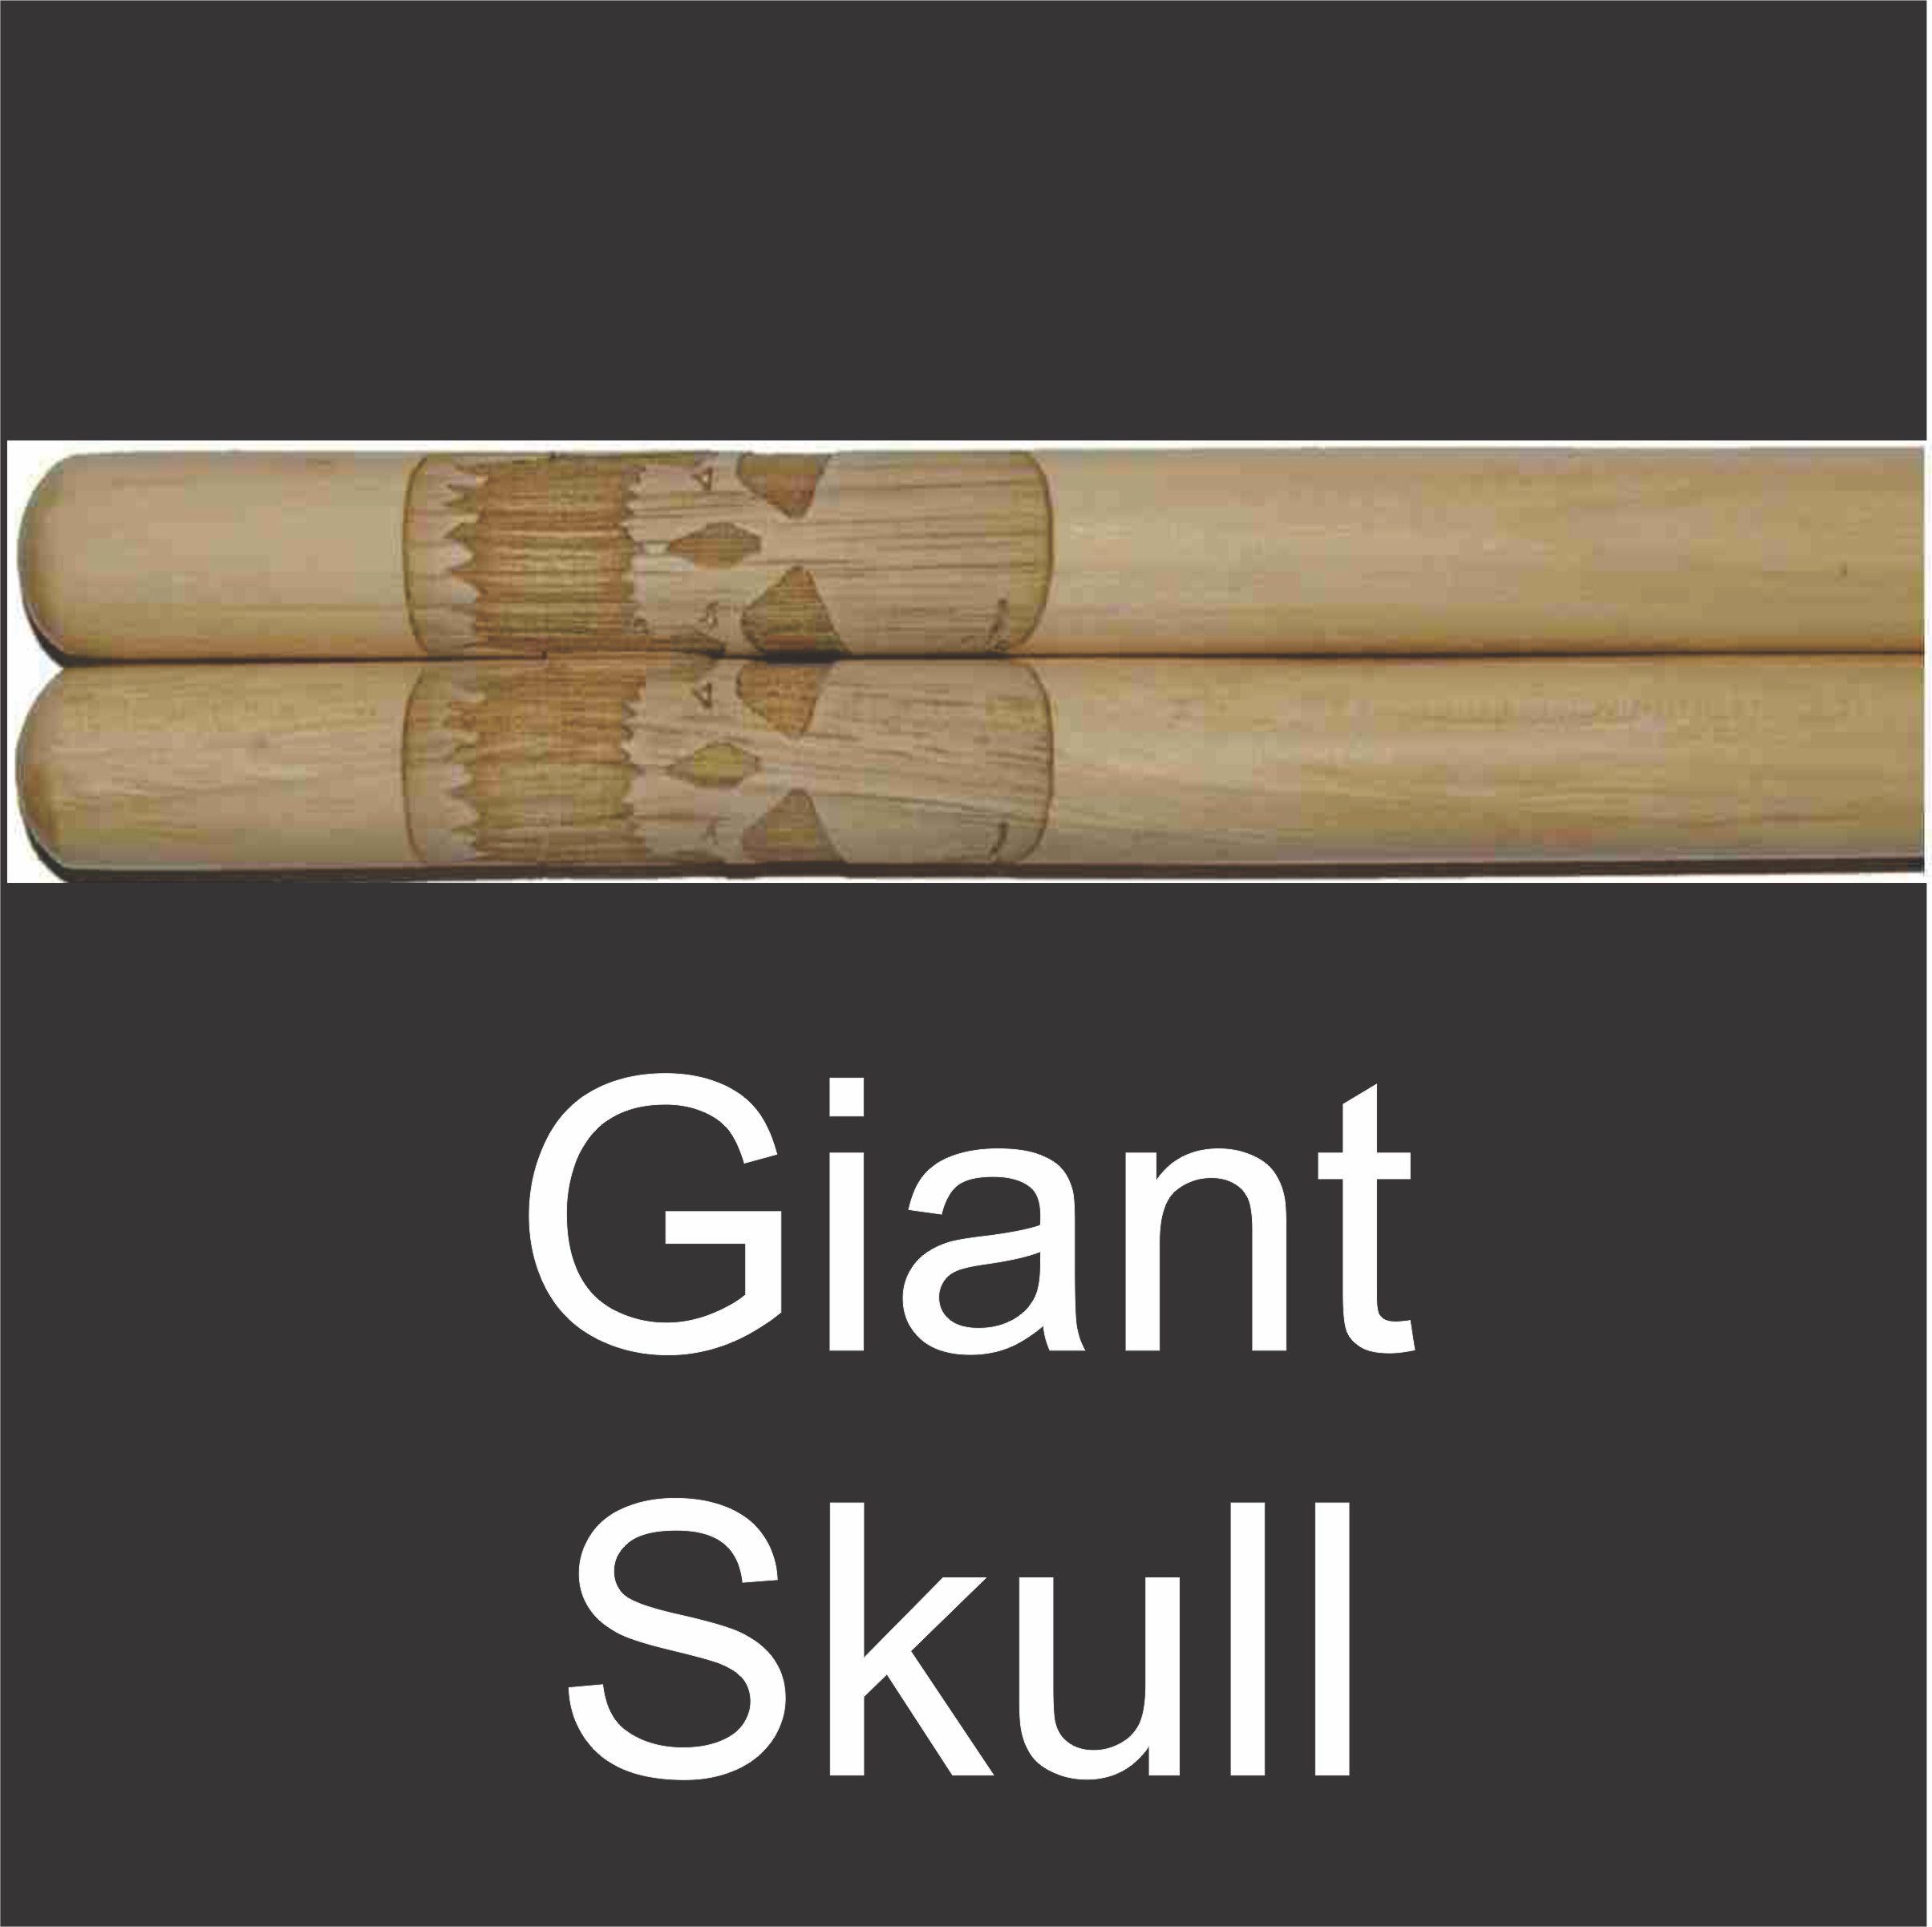 personalized drumstick set with giant skull engraving